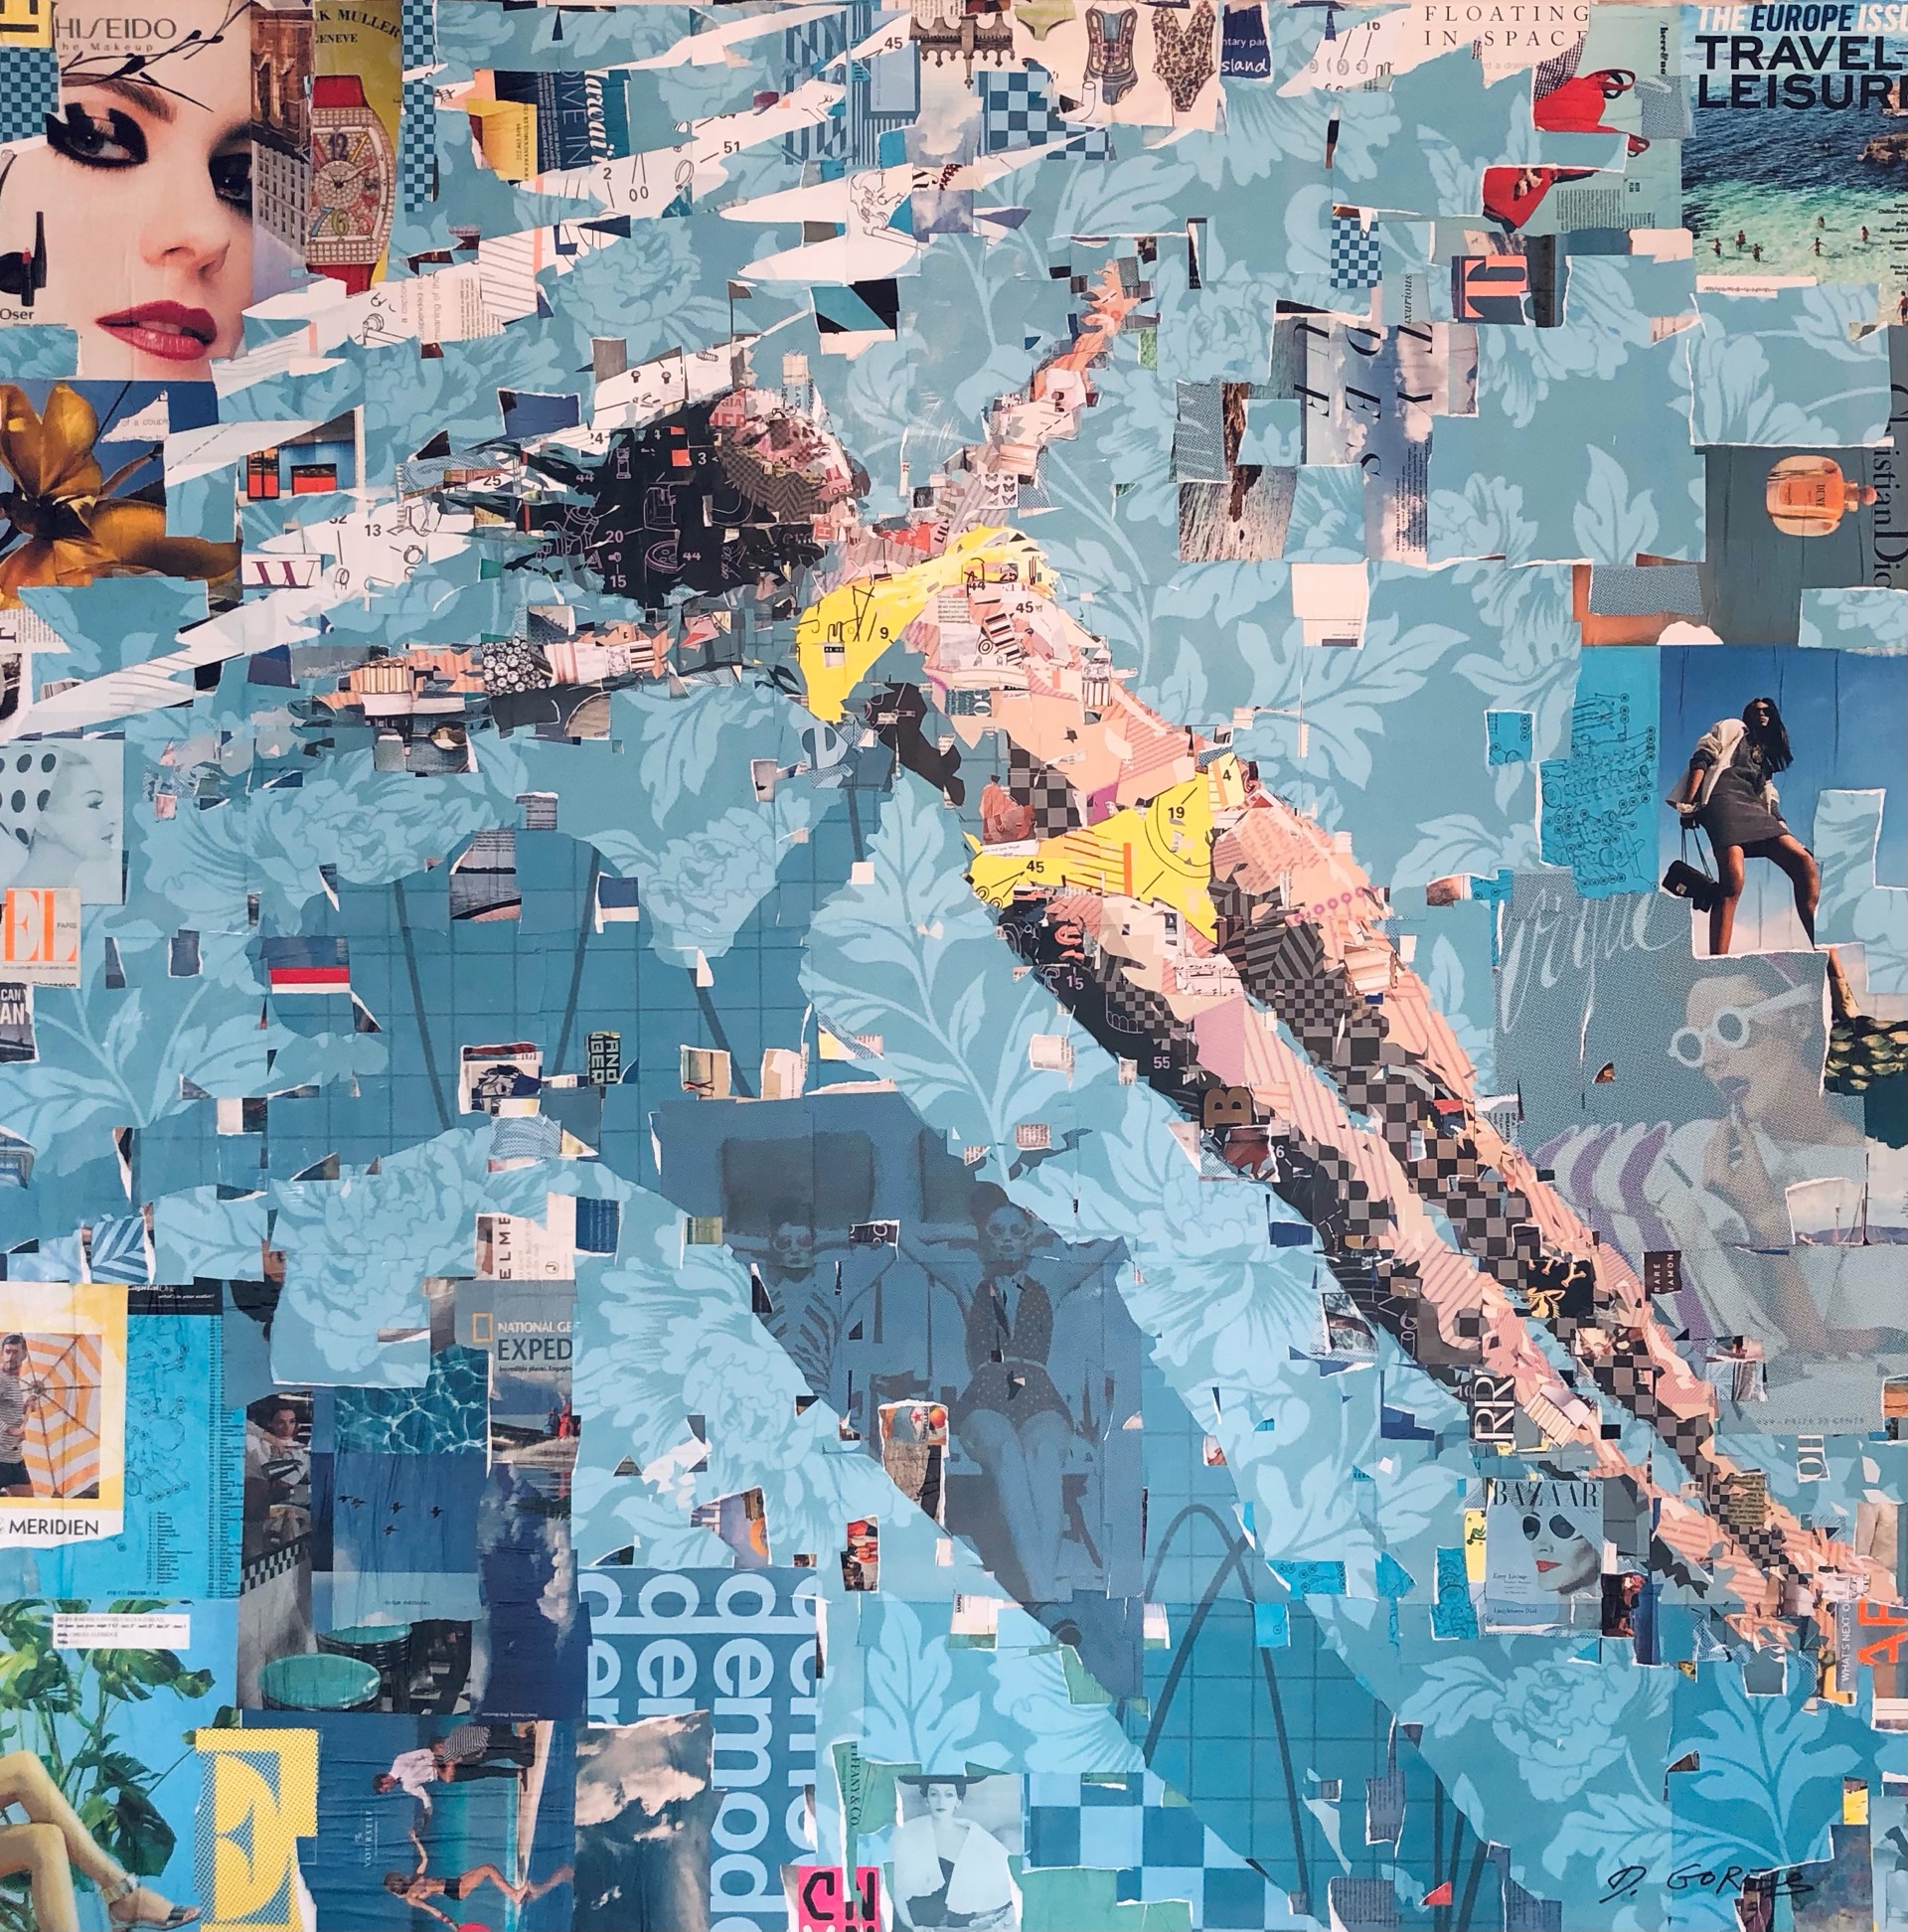 Sea of Tranquility Yellow 3 by Florida Artist Derek Gores 60"H x 60"W collage on canvas